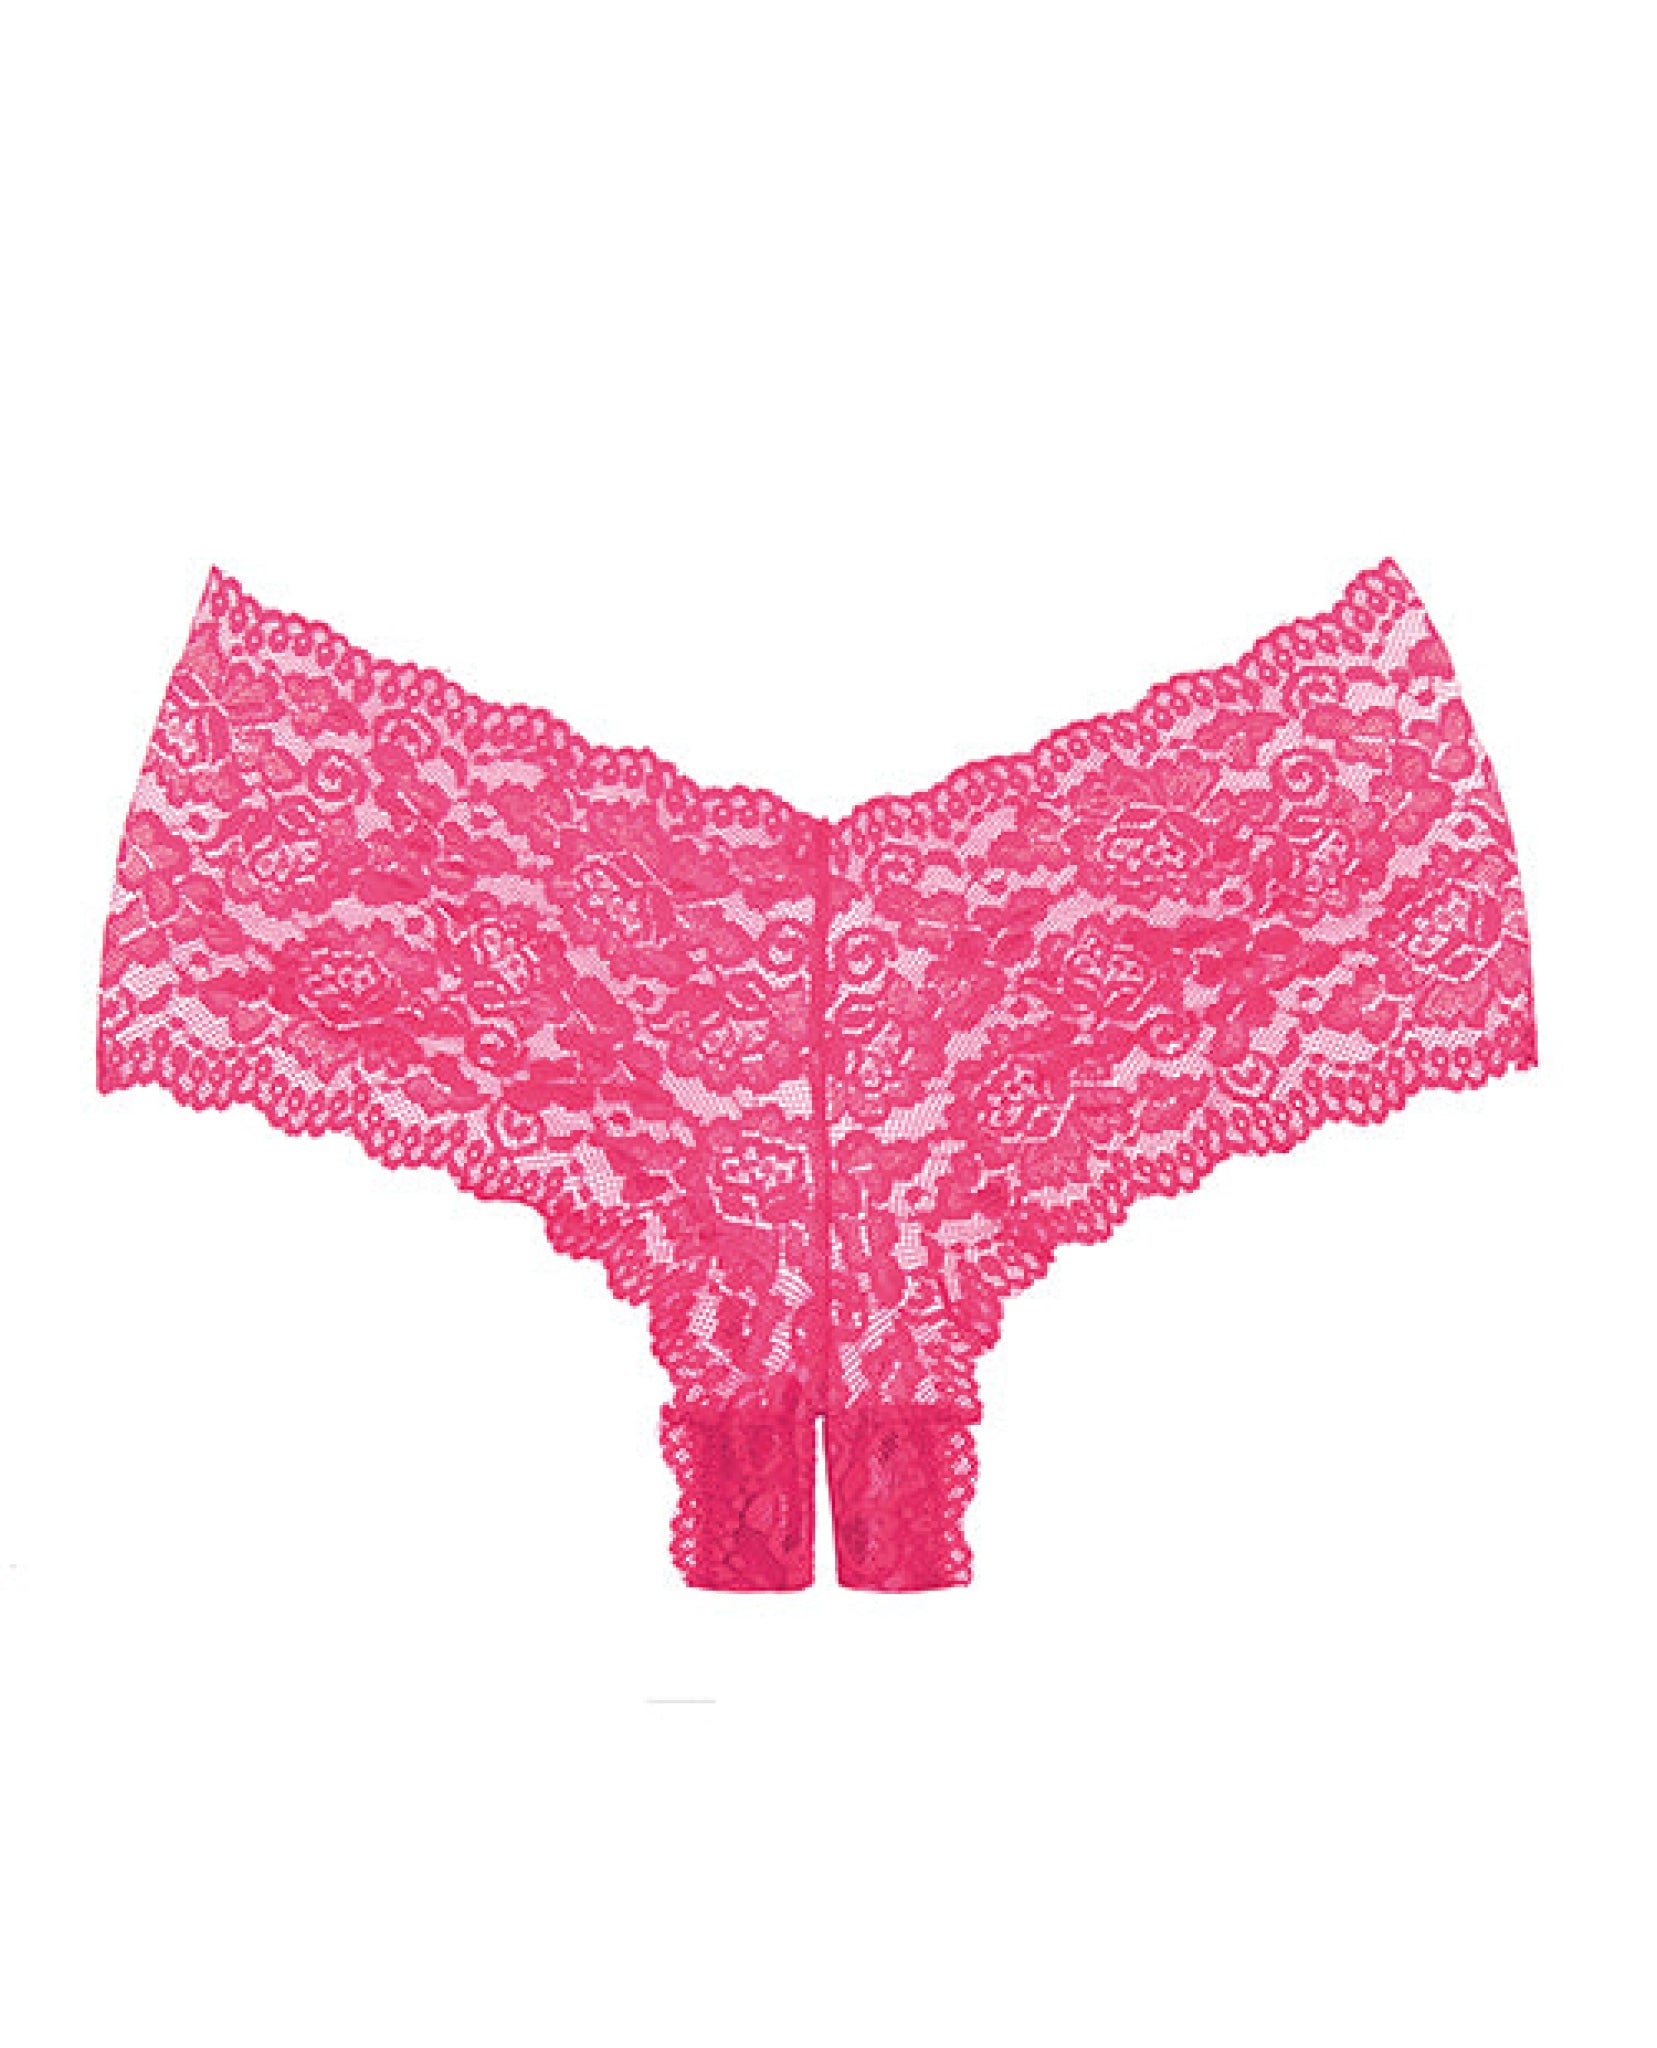 Adore Candy Apple Panty O/s Allure